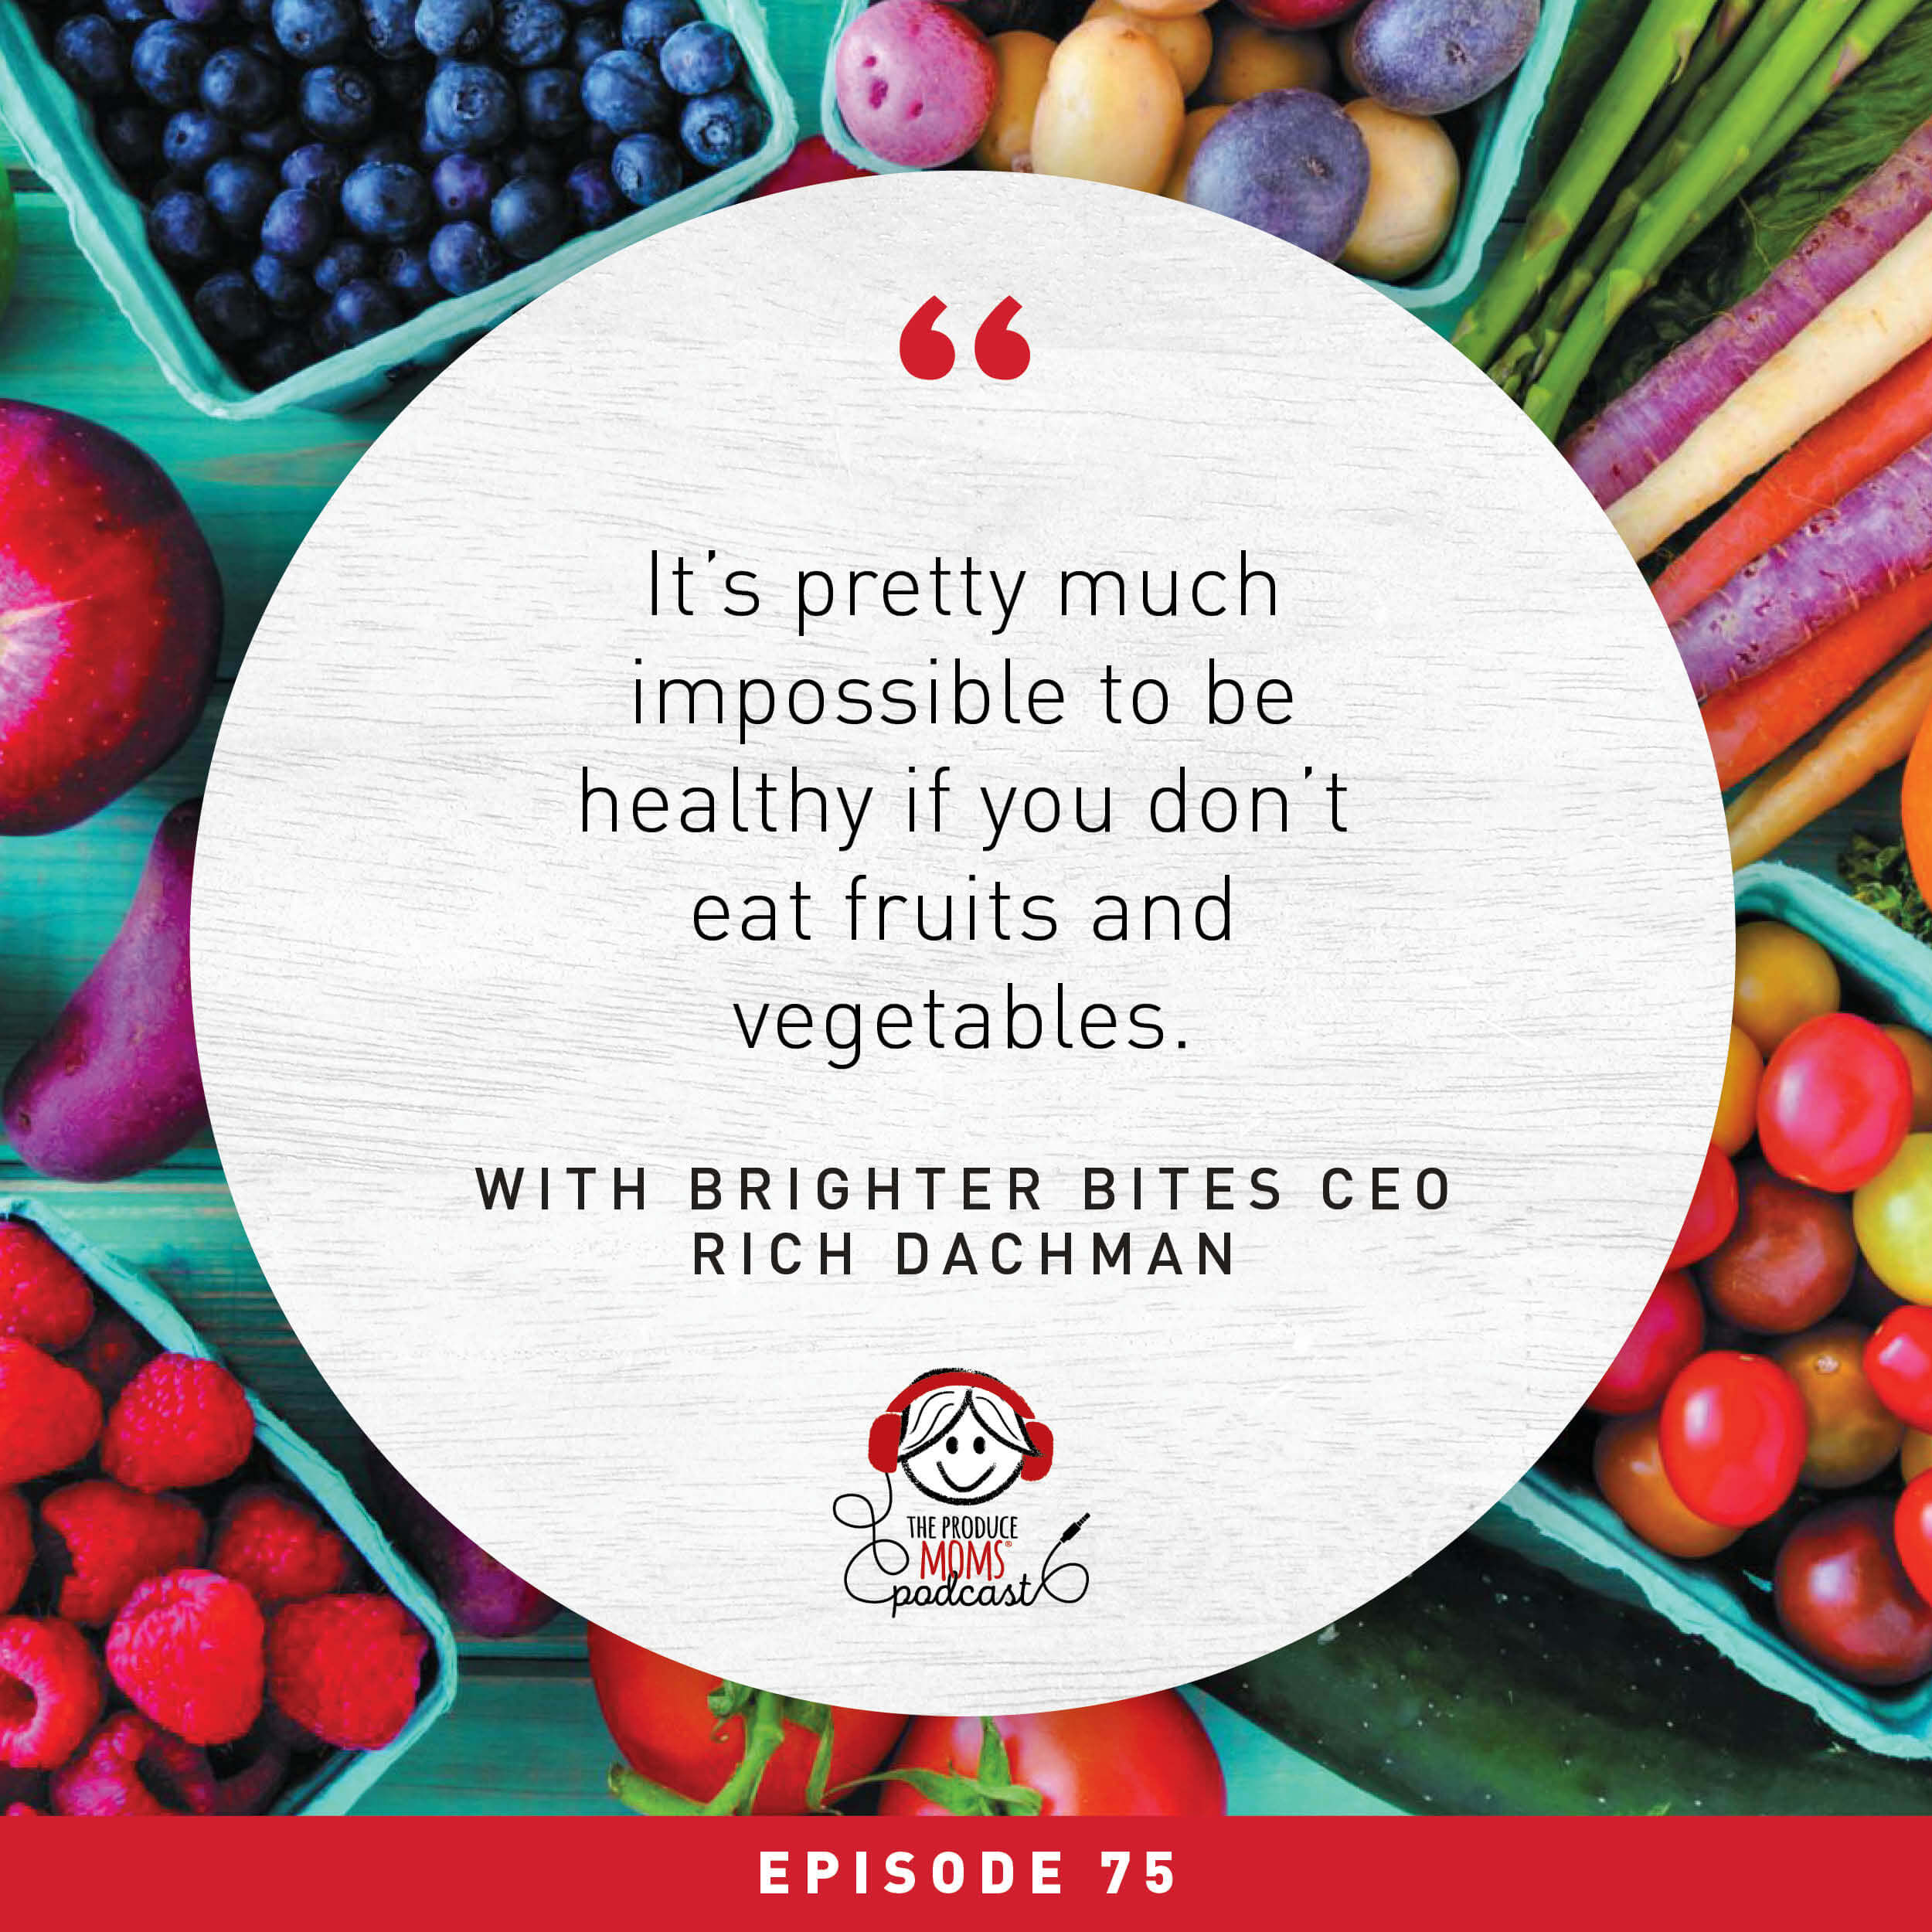 Feeding Families and Creating Healthy Communities with Brighter Bites CEO Rich Dachman